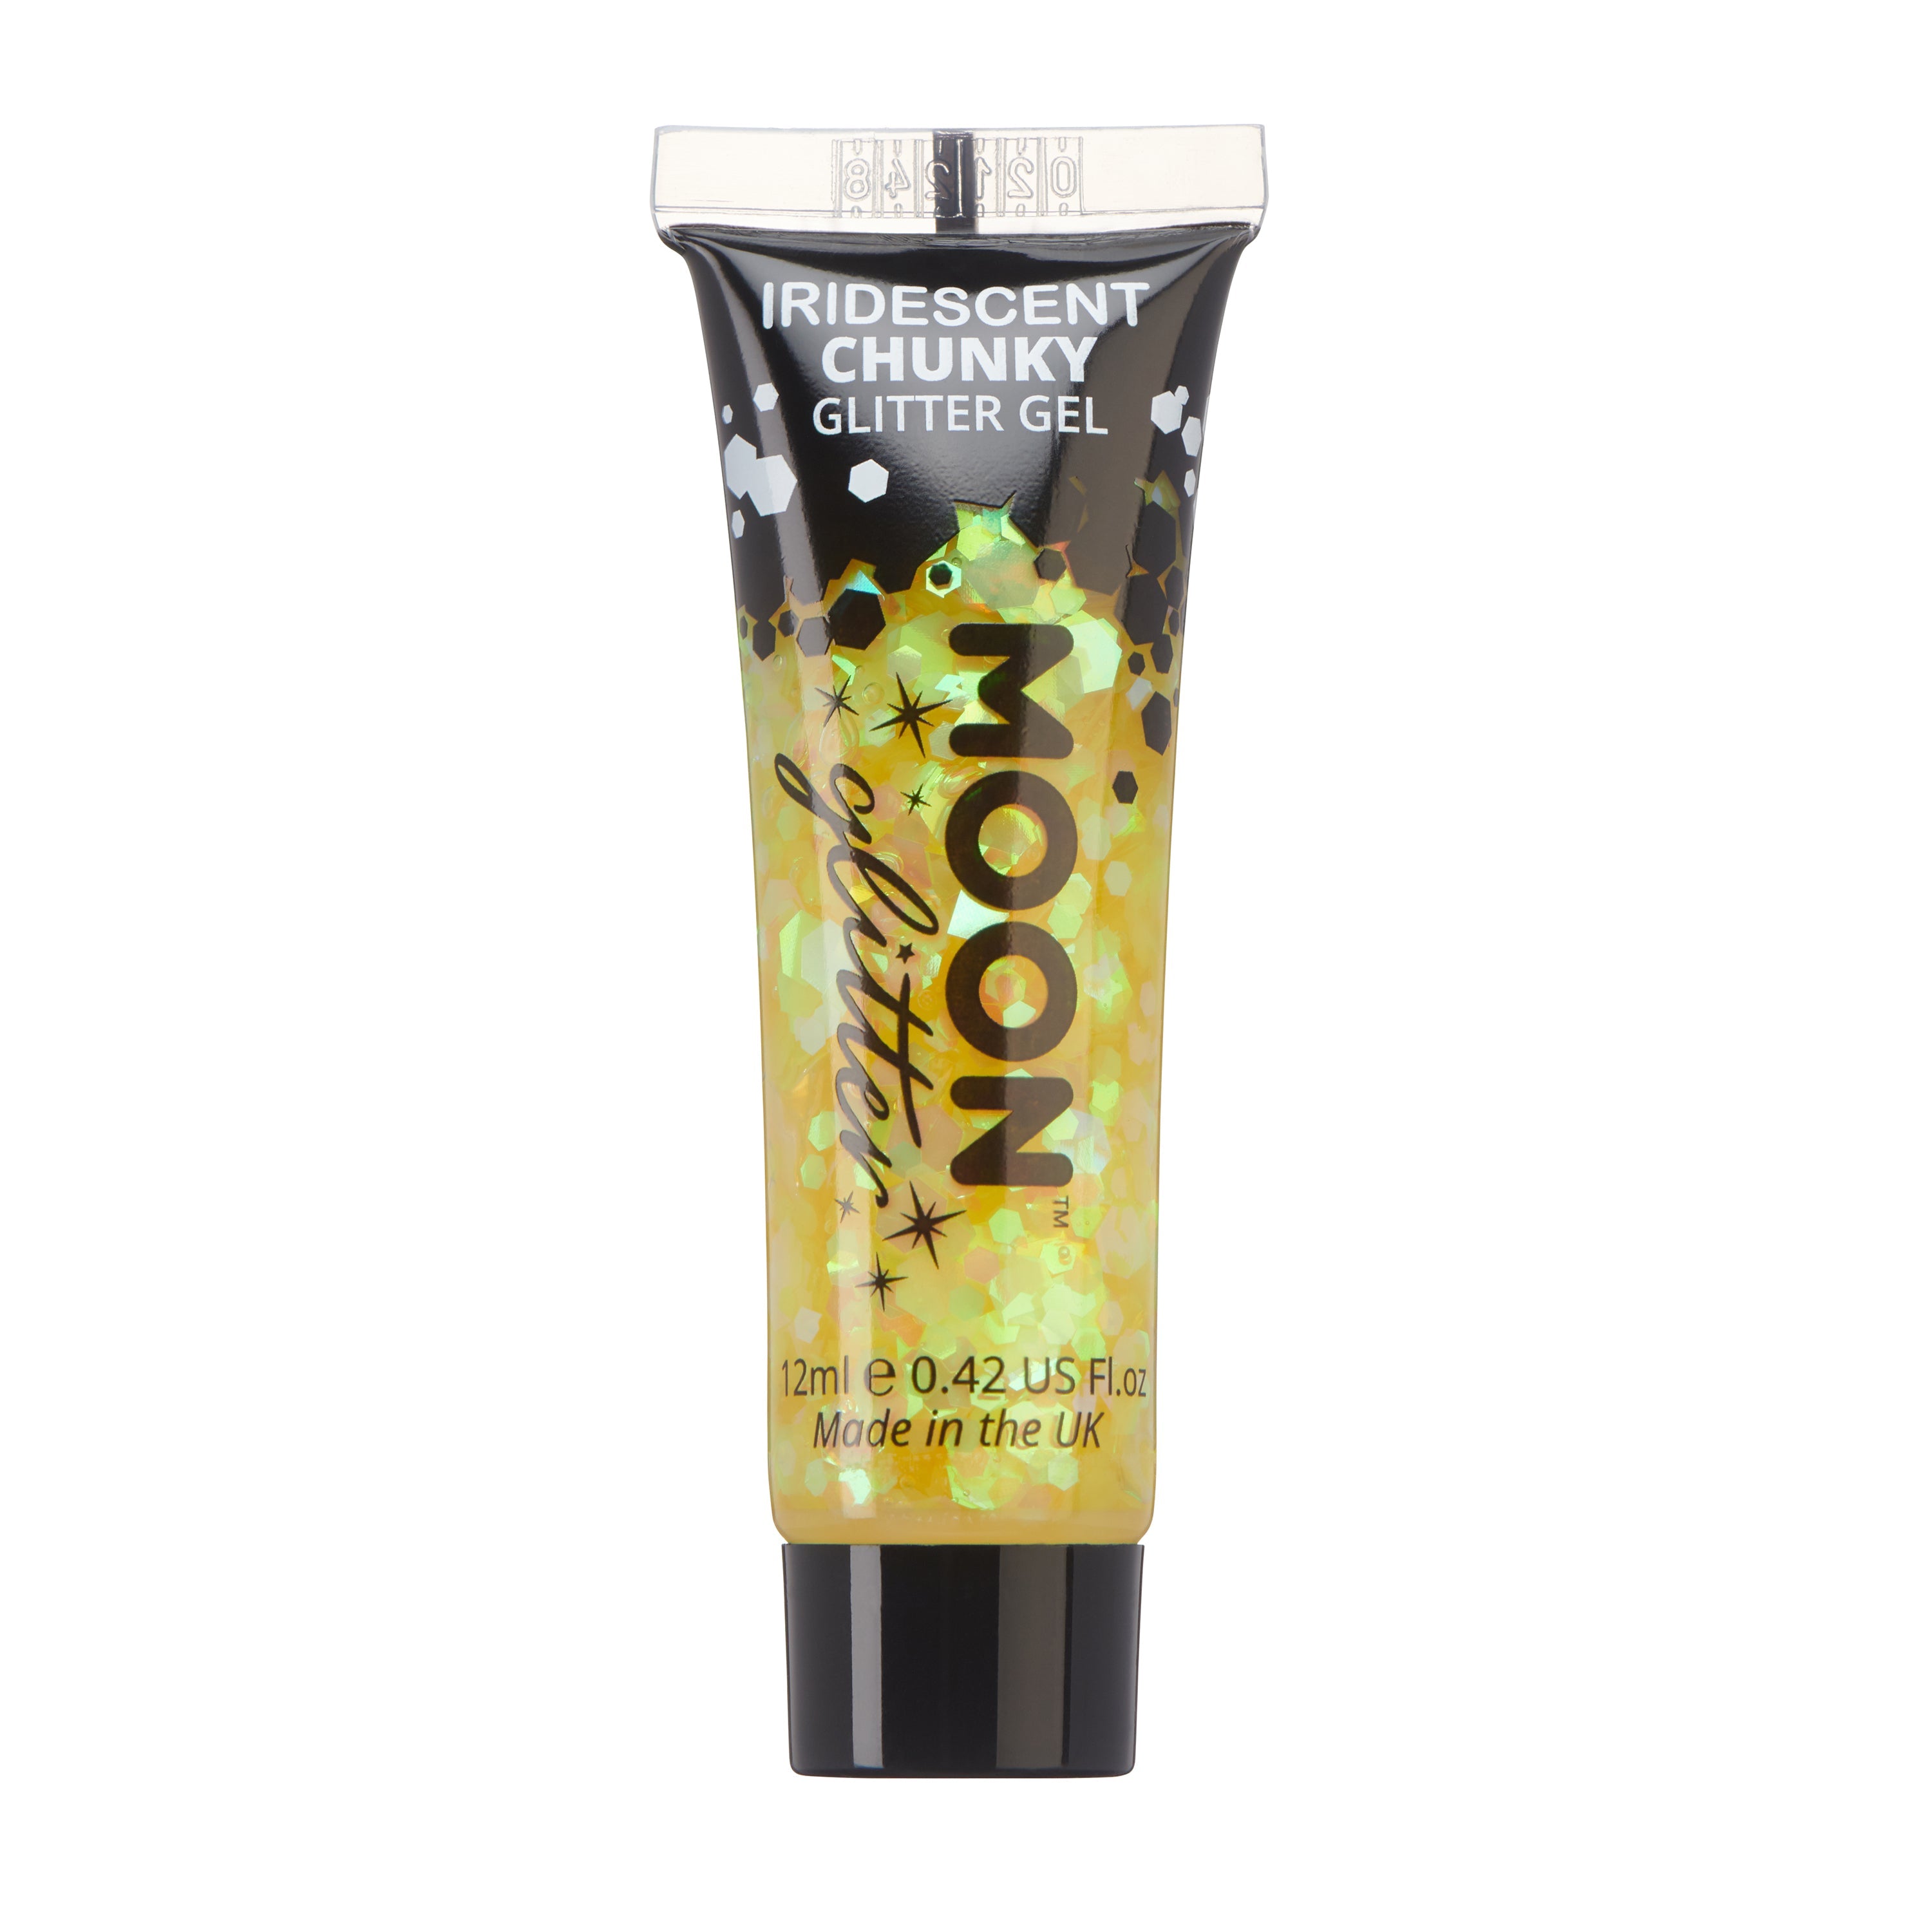 Yellow - Iridescent Chunky Face & Body Glitter Gel, 12mL. Cosmetically certified, FDA & Health Canada compliant, cruelty free and vegan.